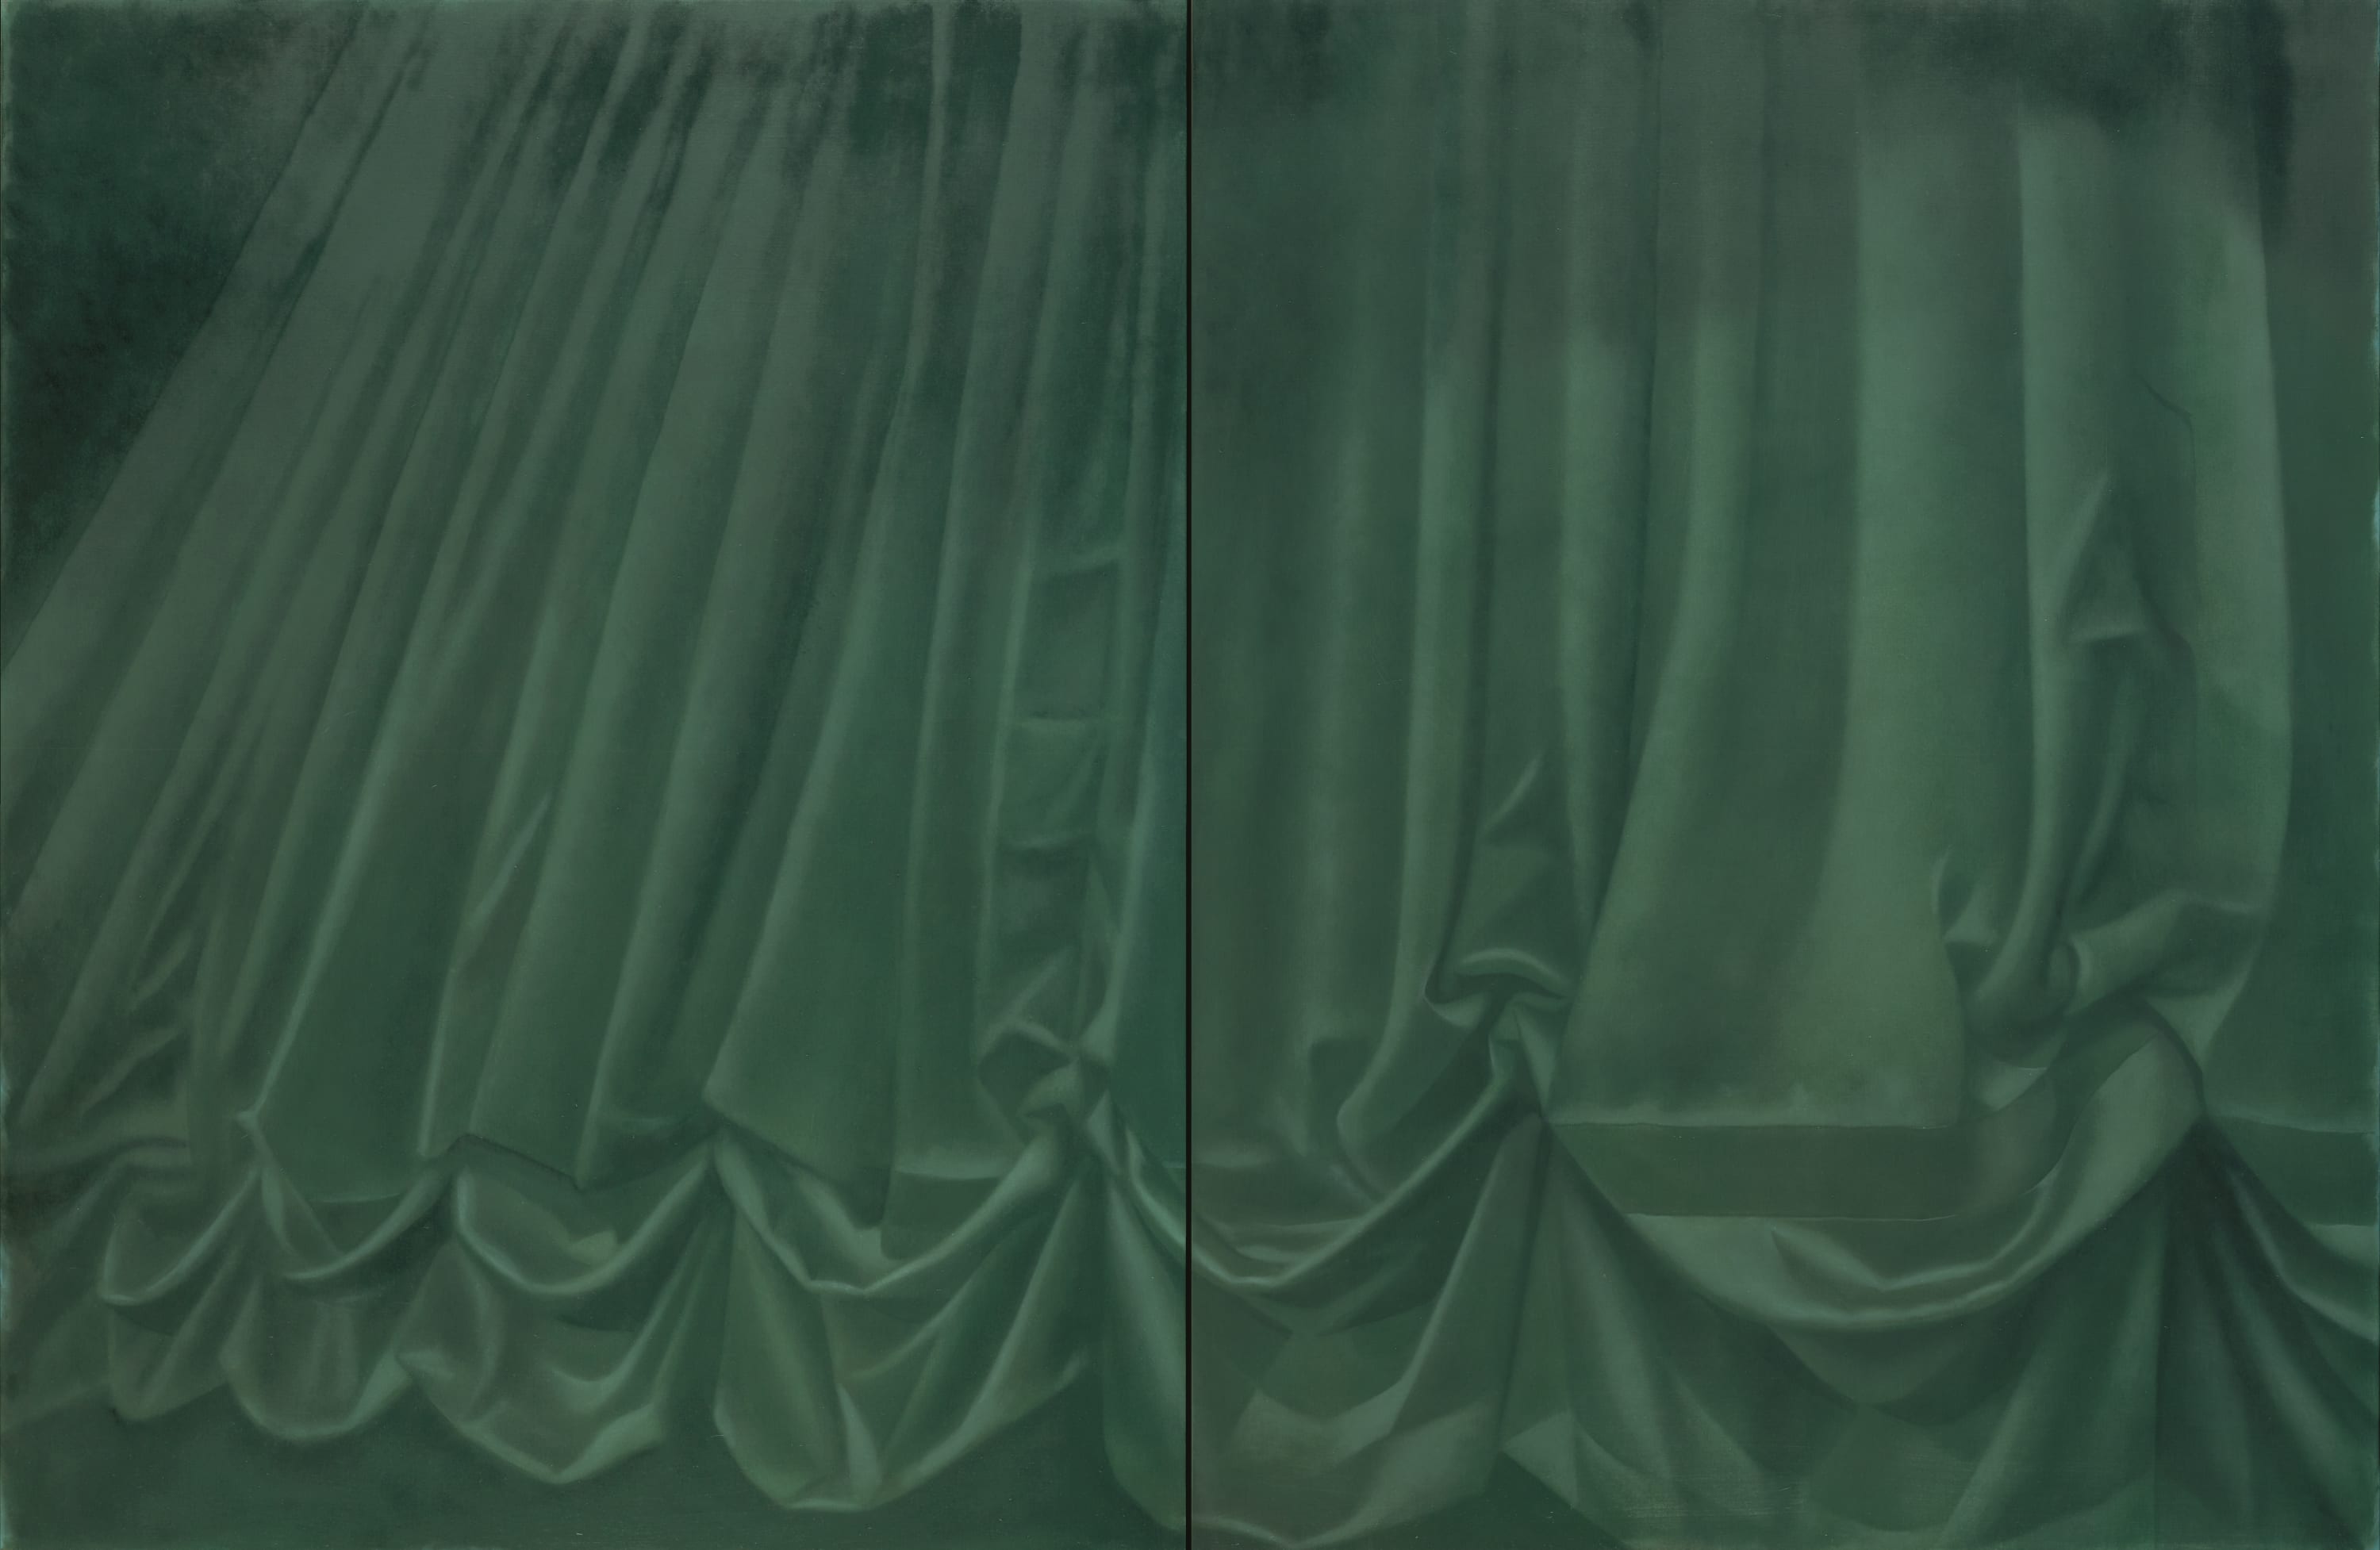 Louise Giovanelli, Dyer, 2020, 170 x 260cm (diptych)